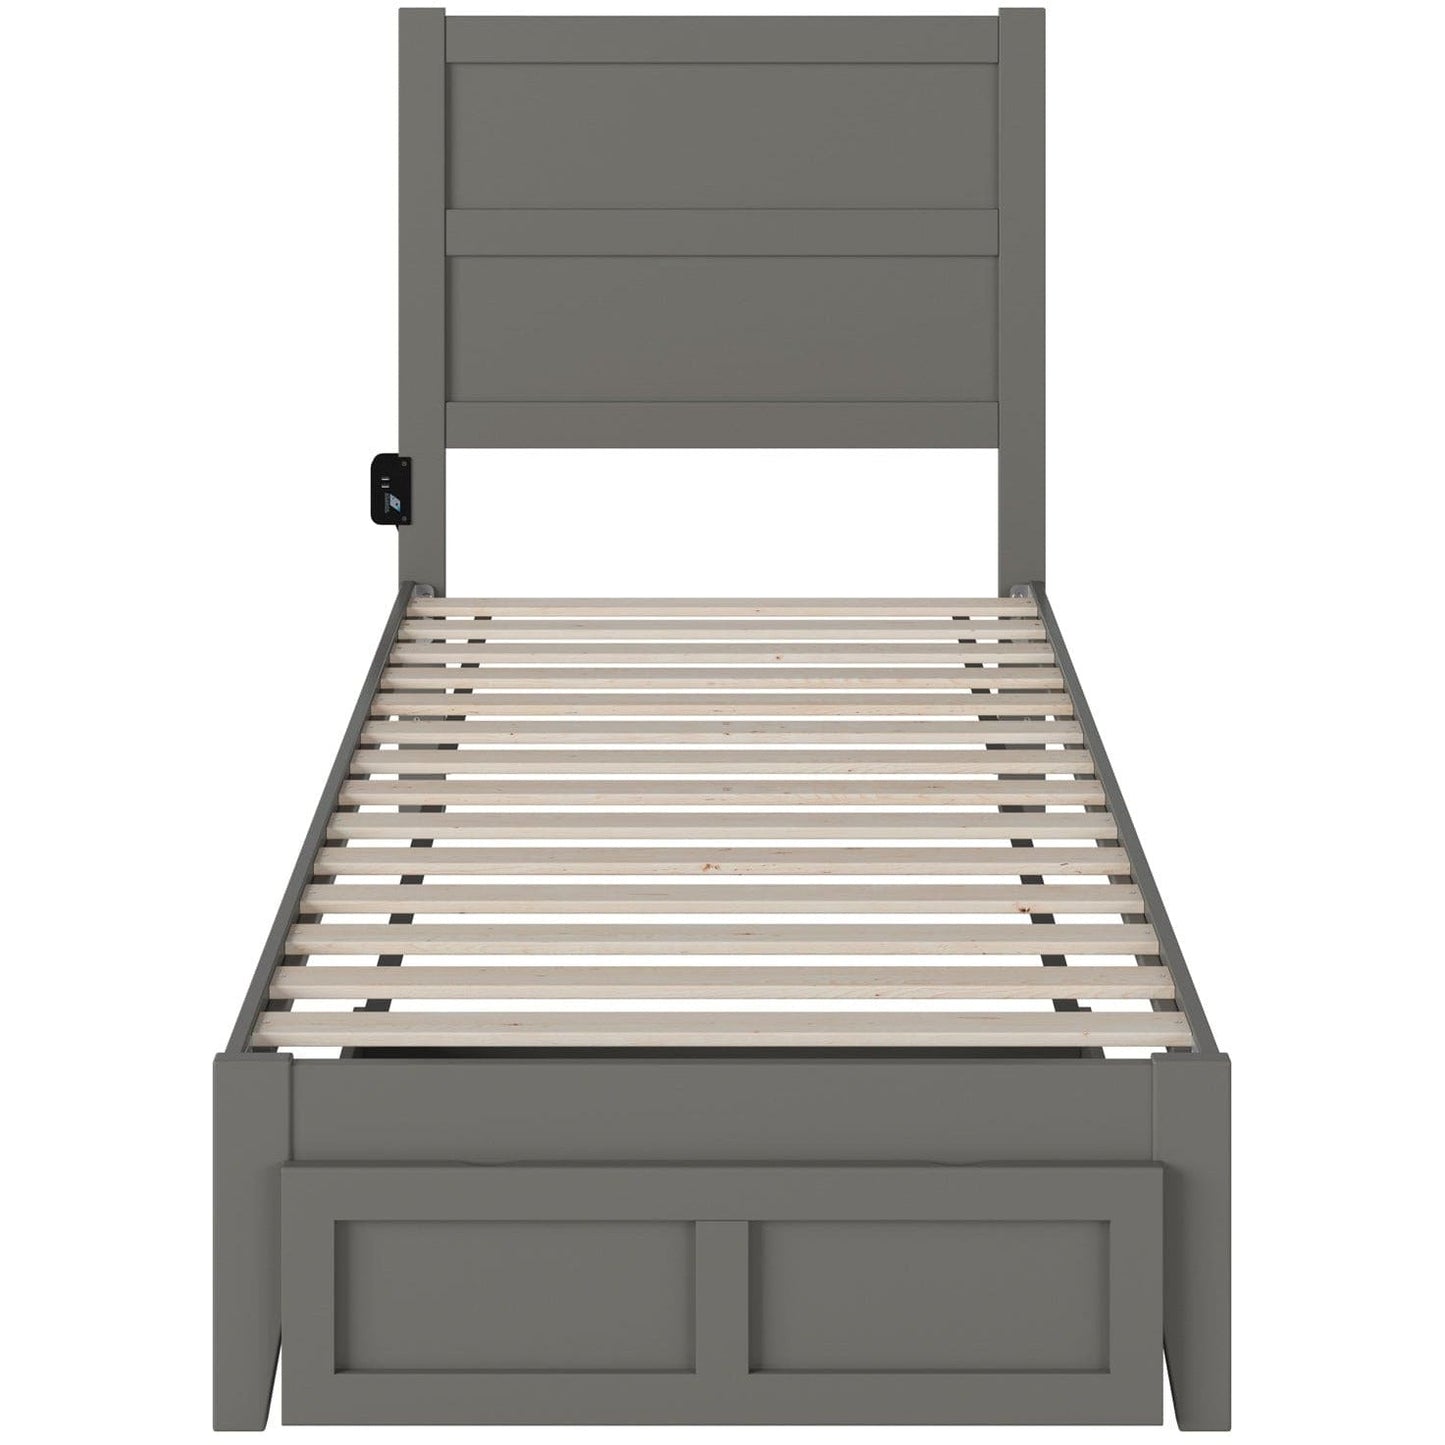 AFI Furnishings NoHo Twin Extra Long Bed with Foot Drawer in Grey AG9112419